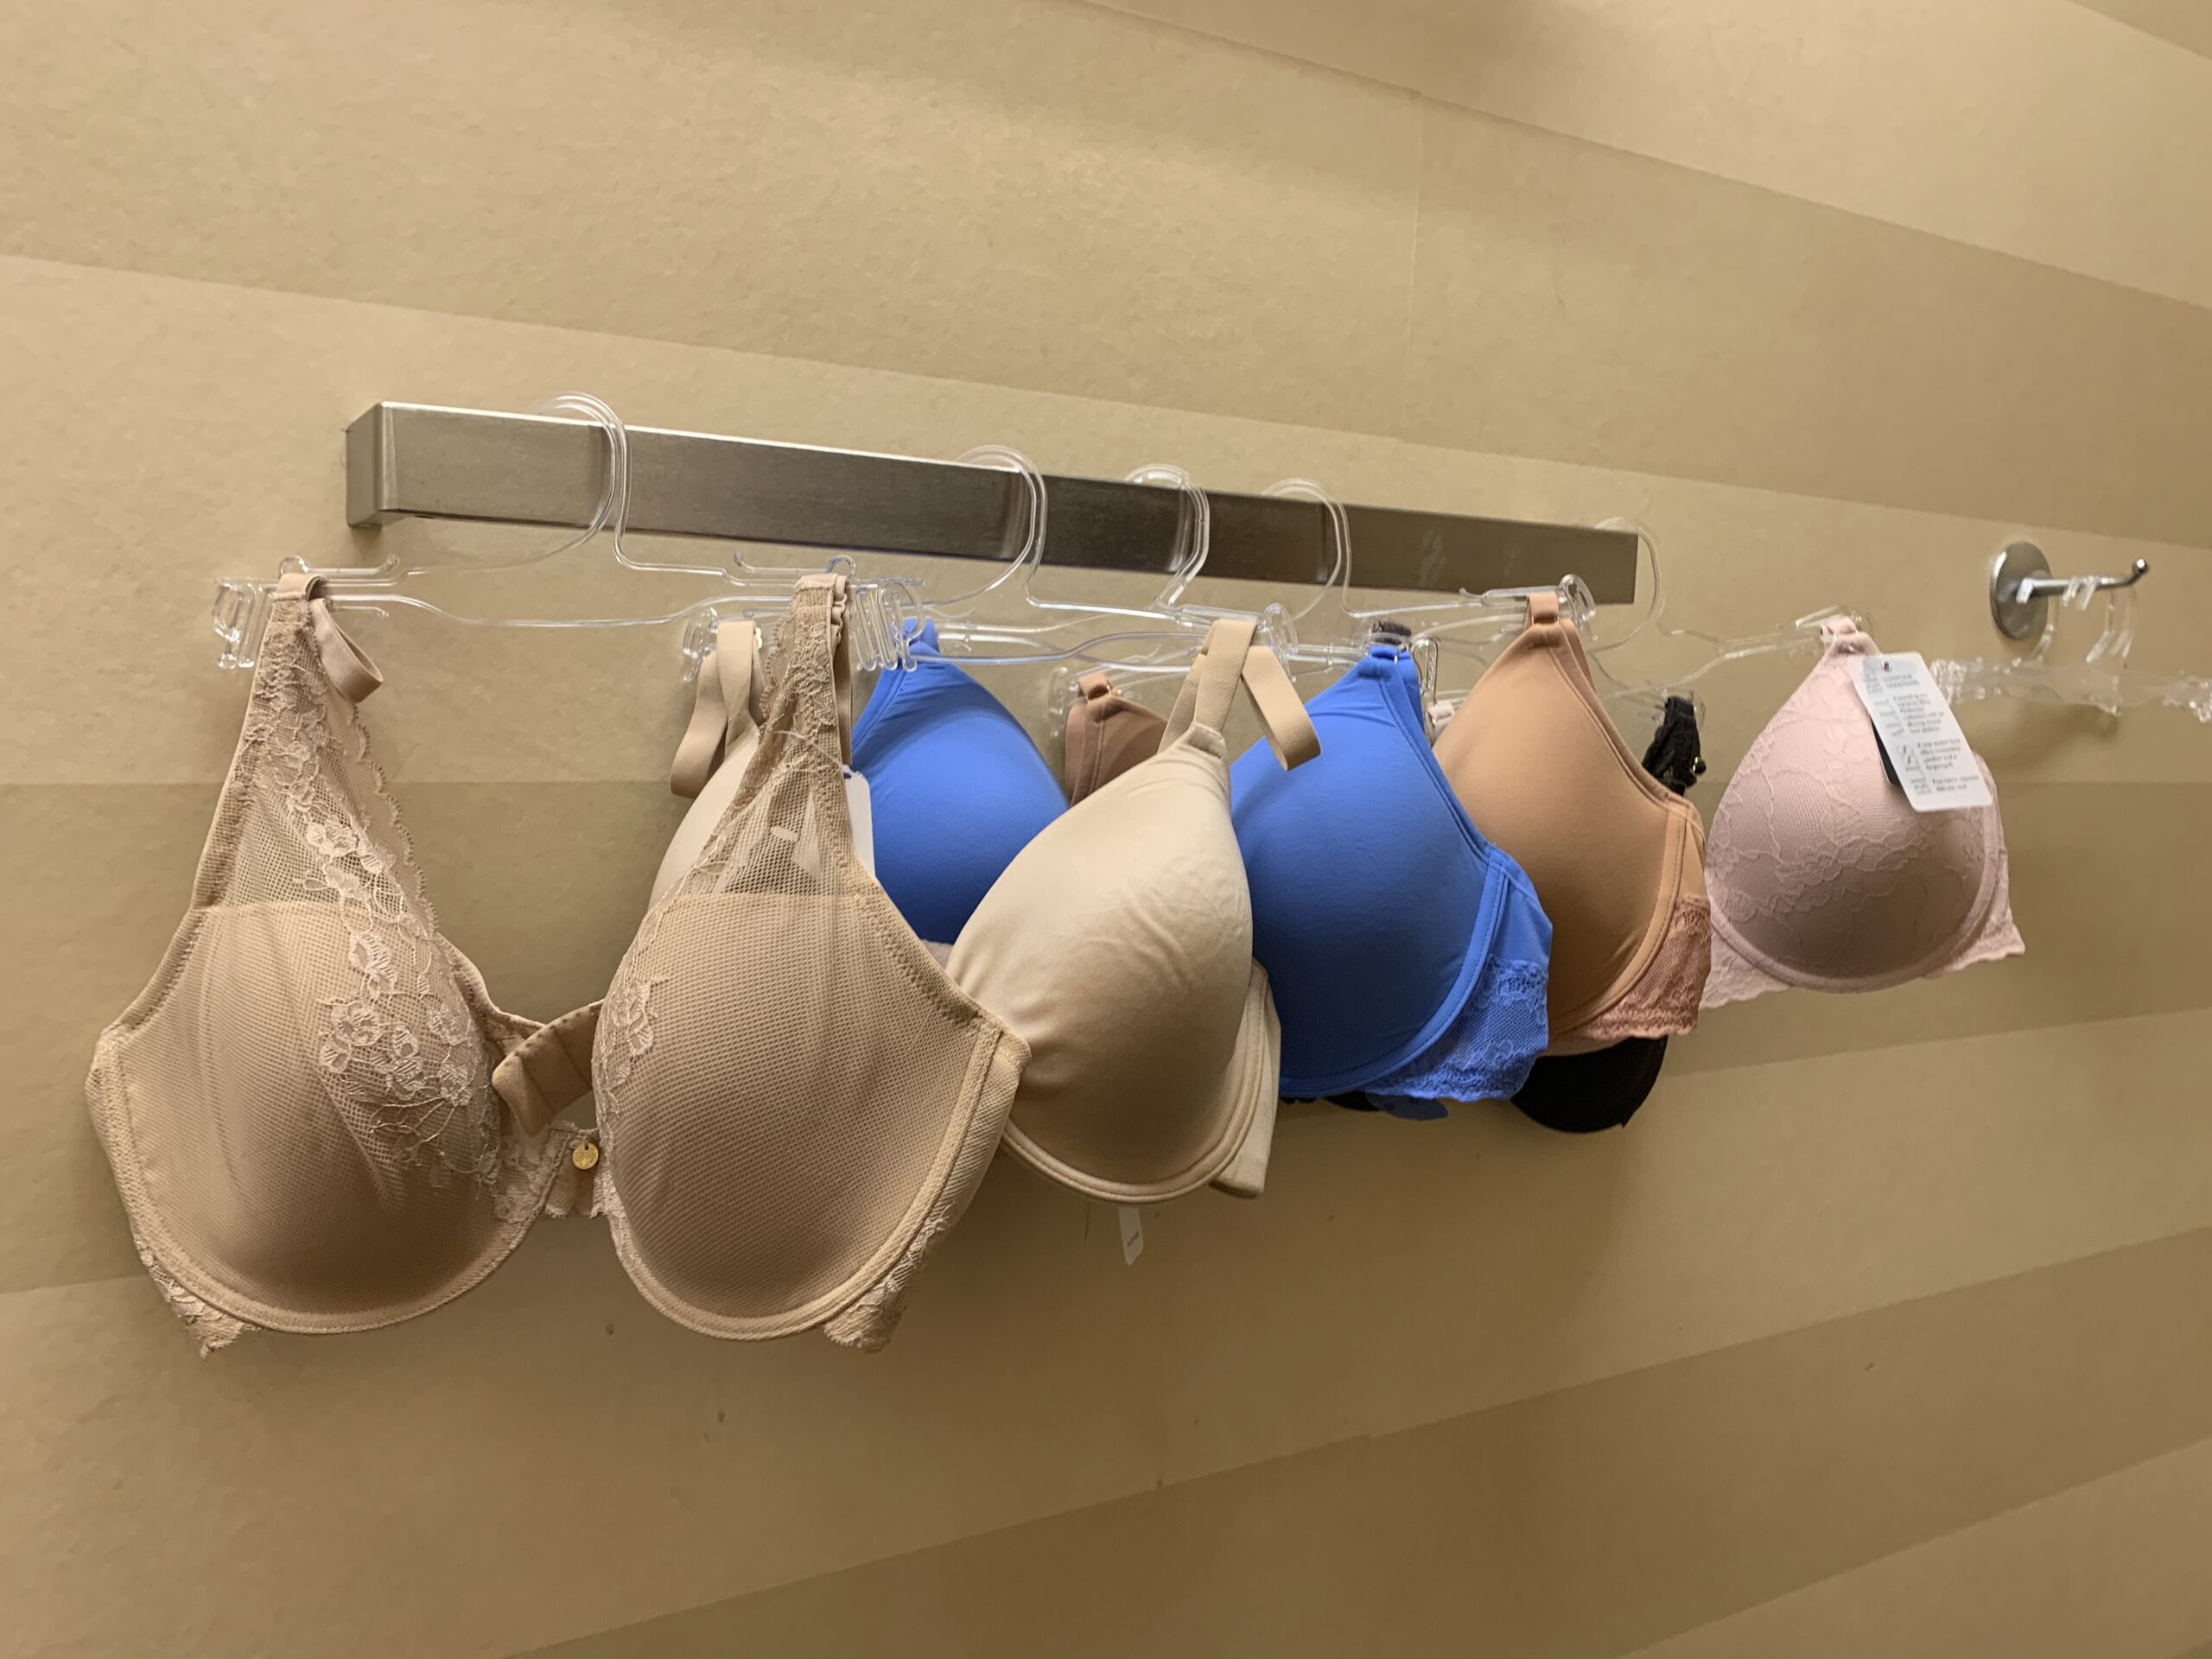 Every girl deserves a professional bra fitting at Nordstrom - Midlife Mama